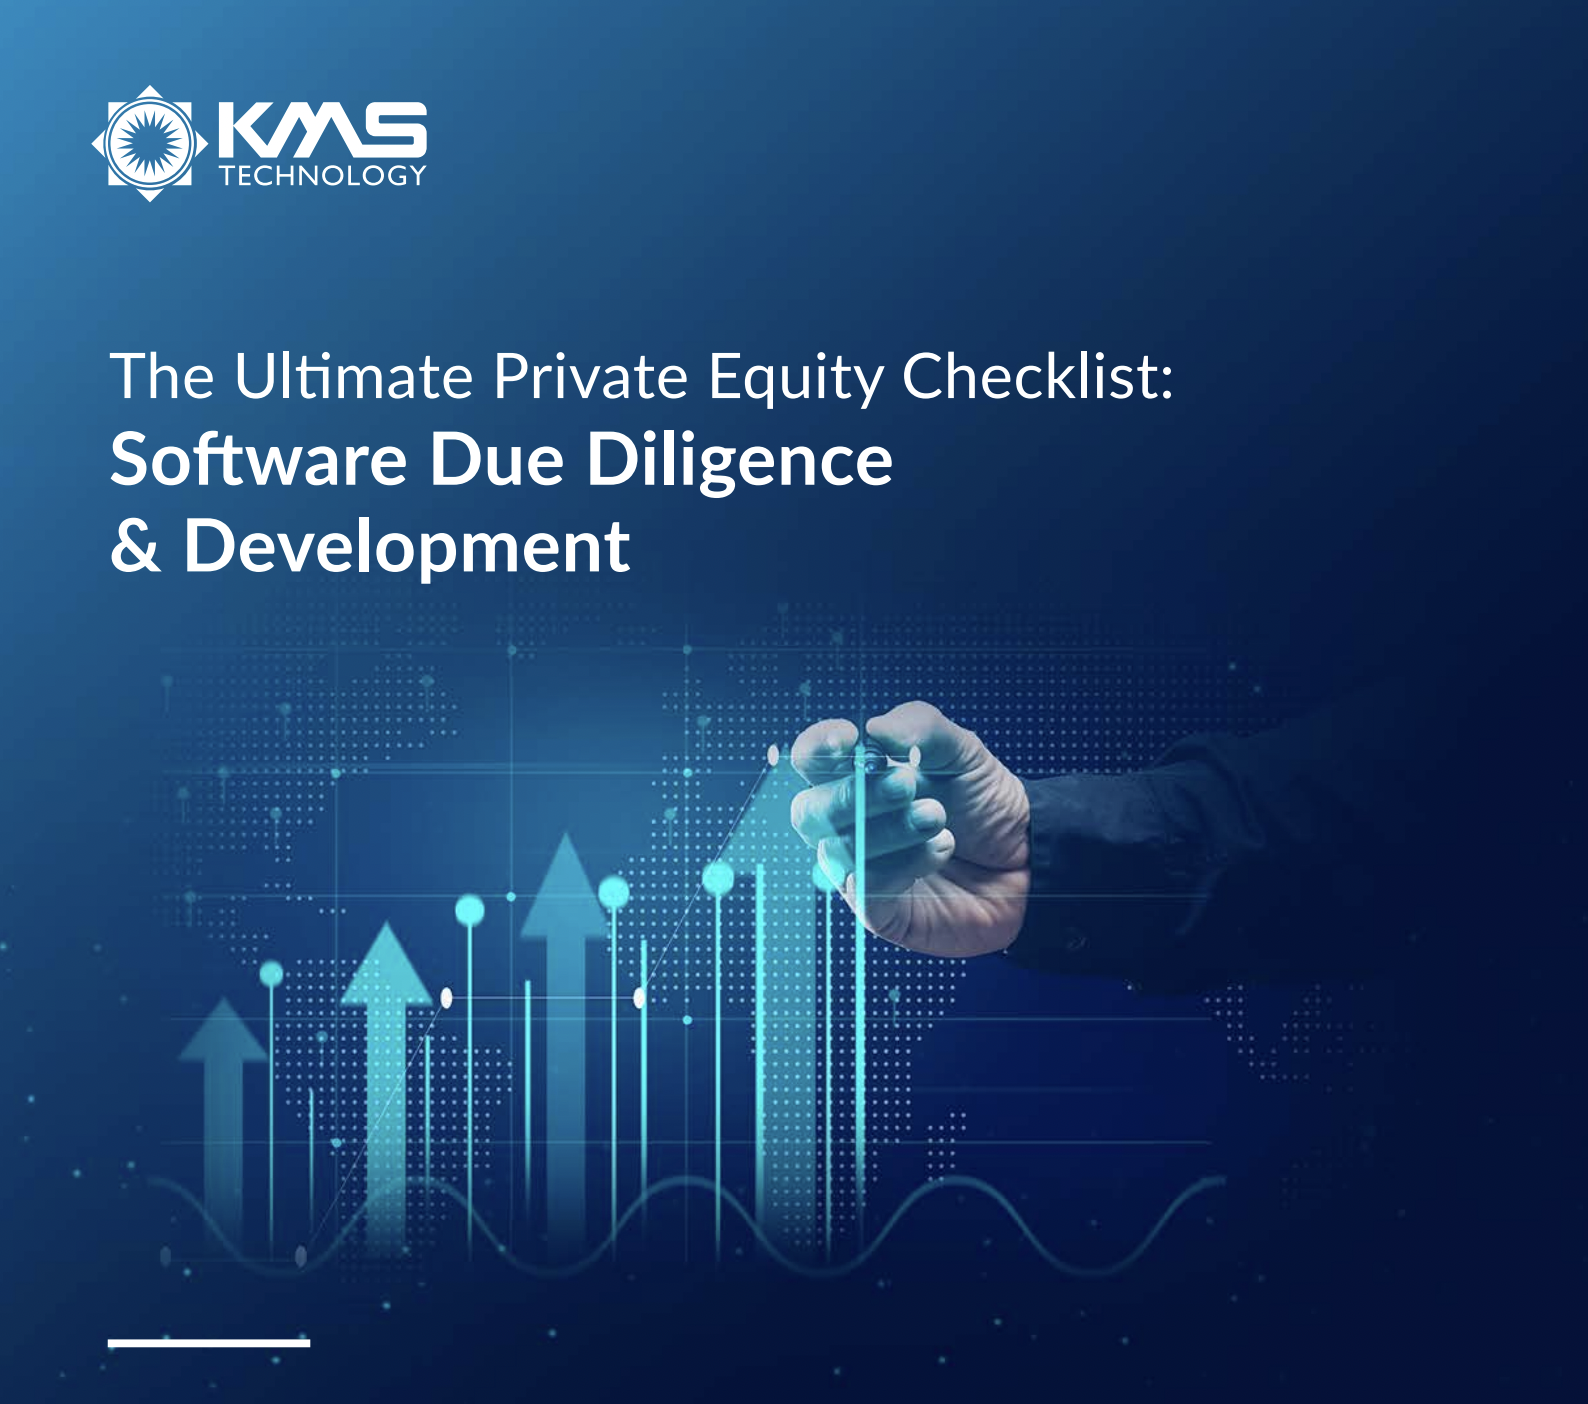 The Ultimate Private Equity Checklist: Software Due Diligence & Development